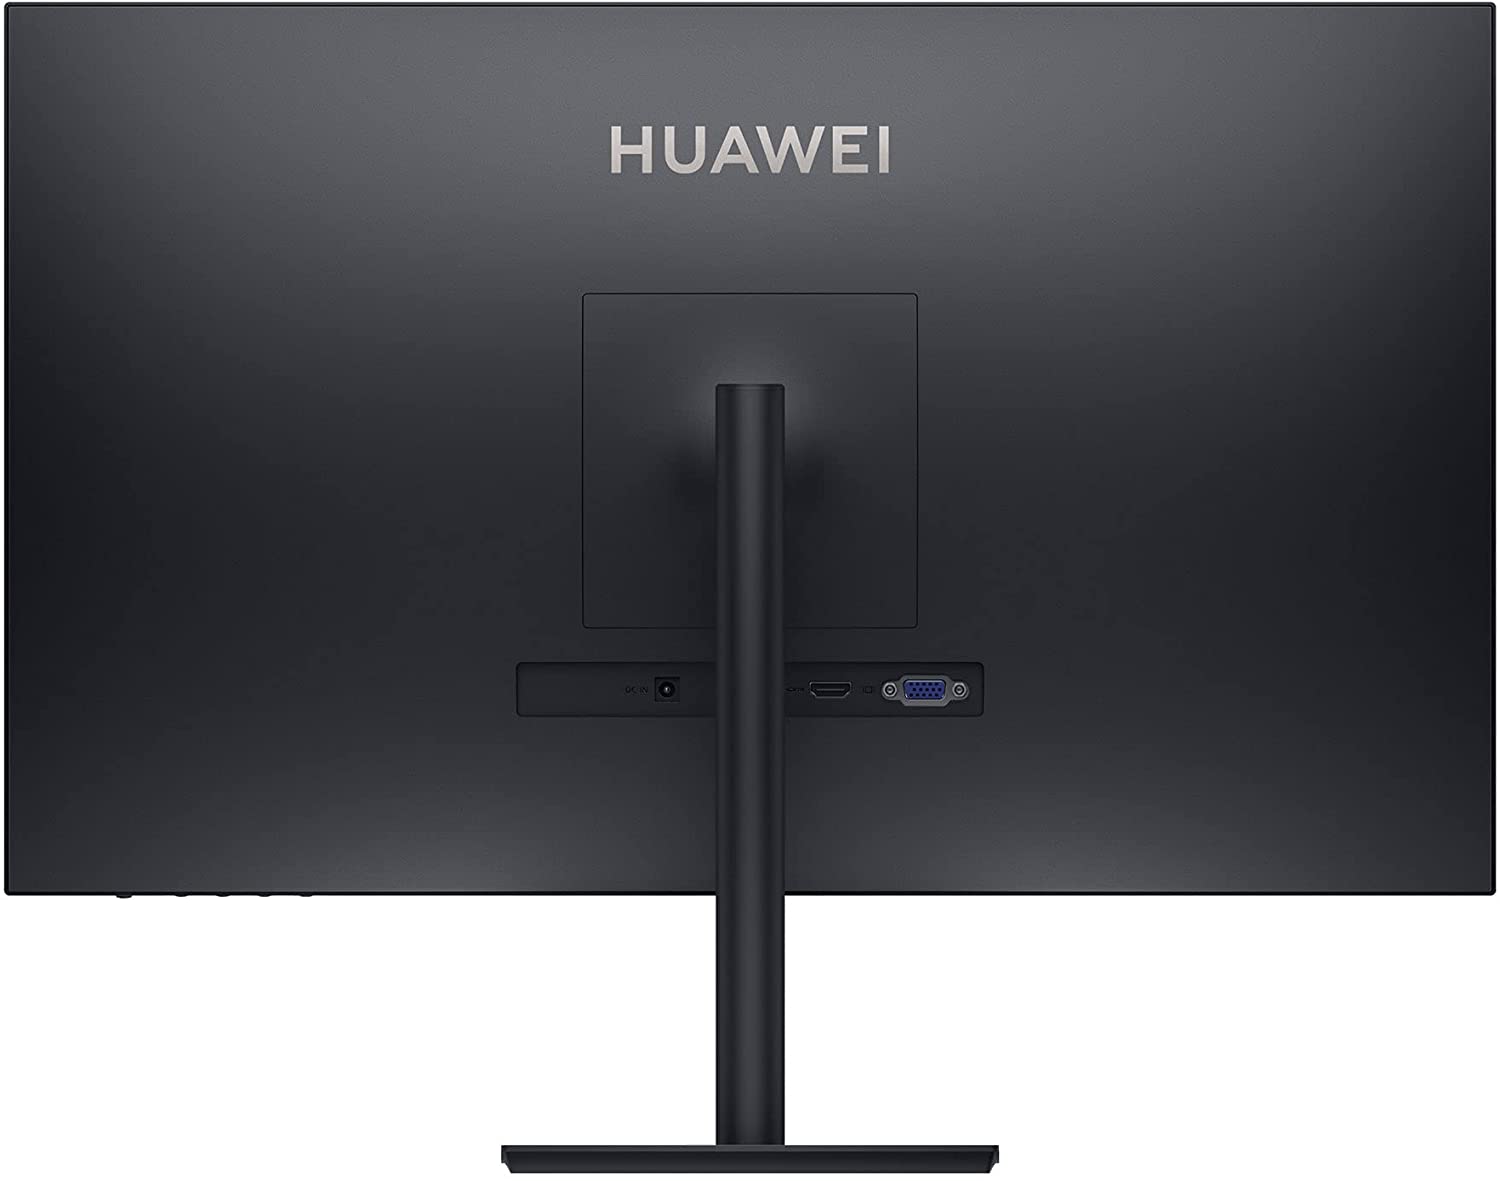 HUAWEI MONITOR 23.8 COLOR NEGRO